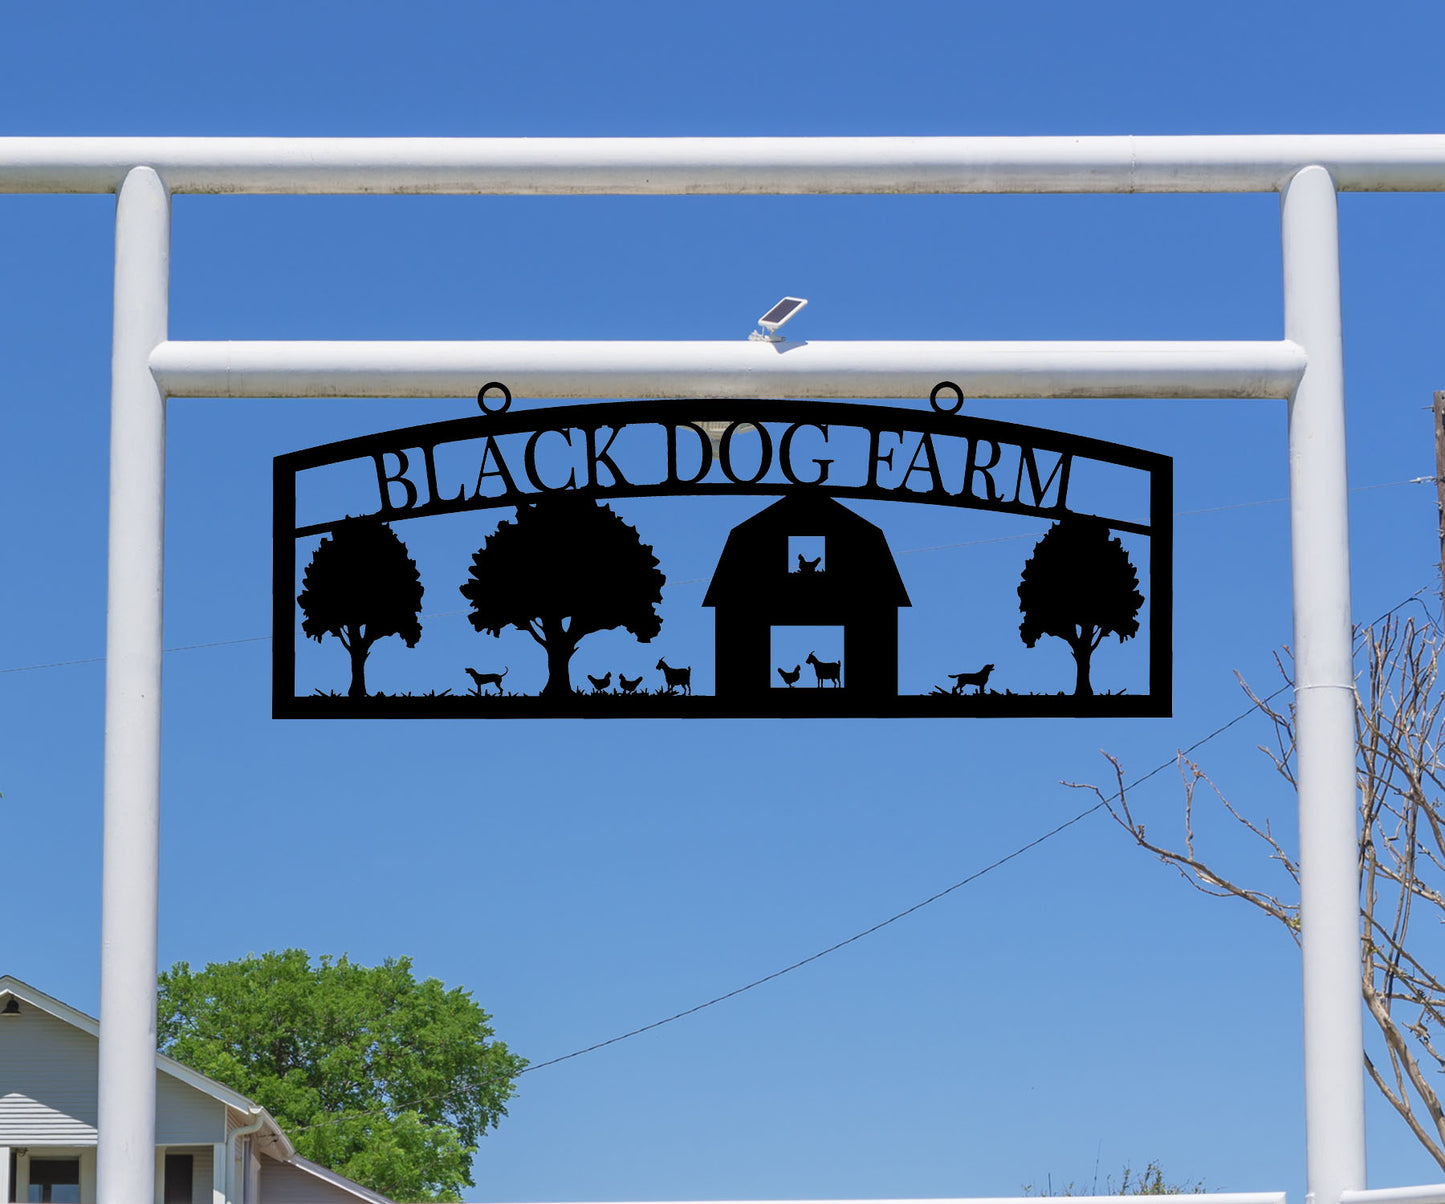 Barn and Tree Farm sign, with Goats